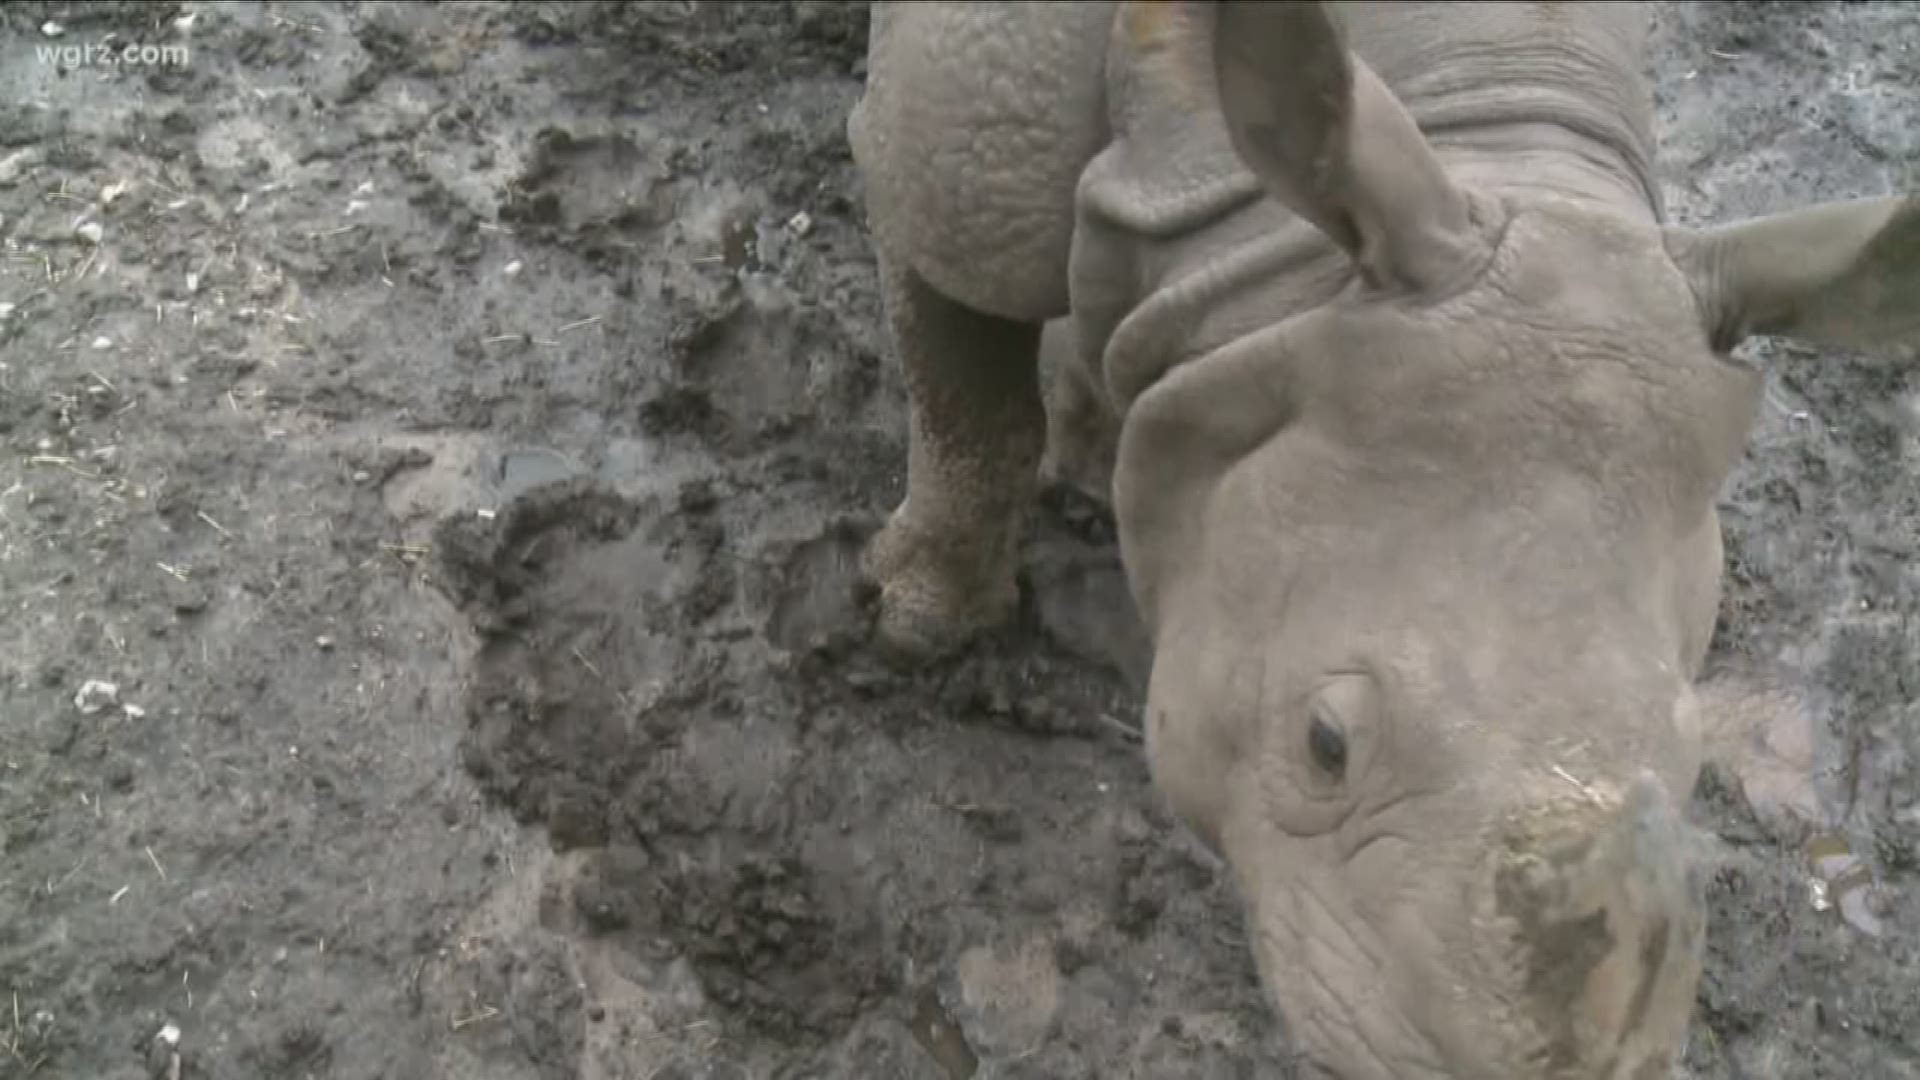 The Buffalo Zoo announced it has raised $13,500 to support and expand the Indonesian Rhino Sanctuary in Indonesia.